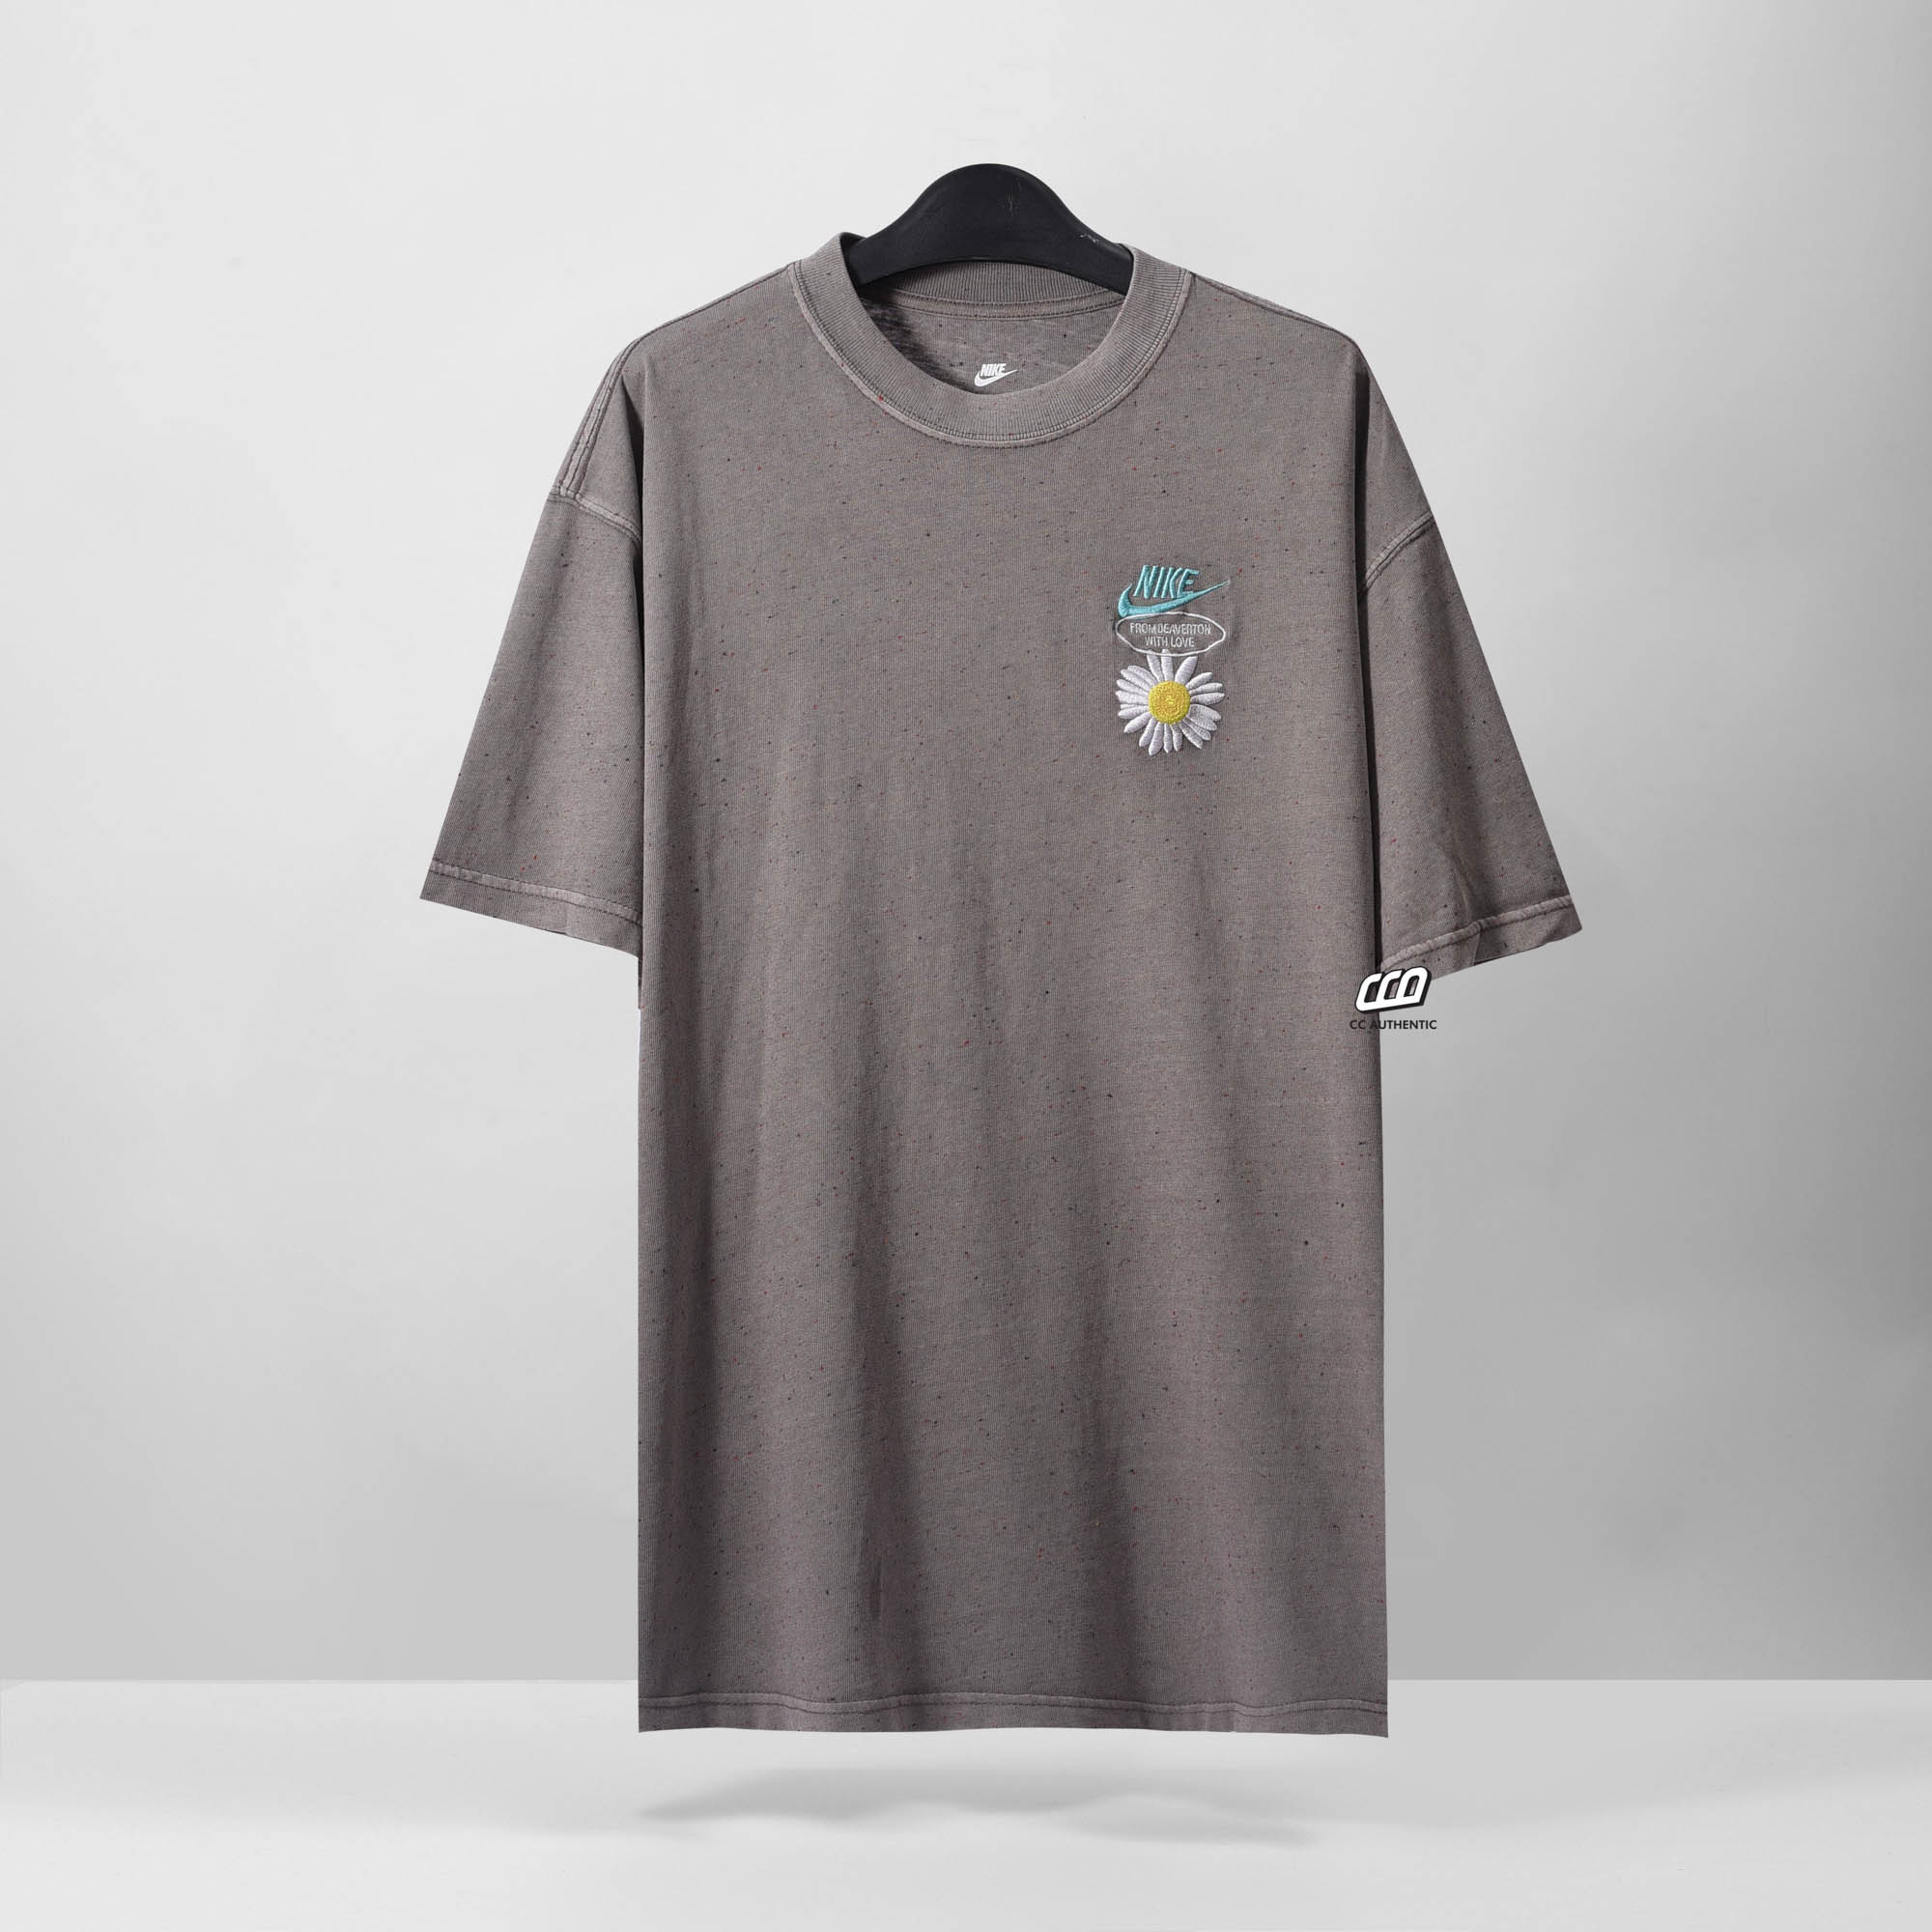 NIKE T-SHIRT MAX90 DAISY HAVE A NIKE DAY T-SHIRT - CAVE STONE